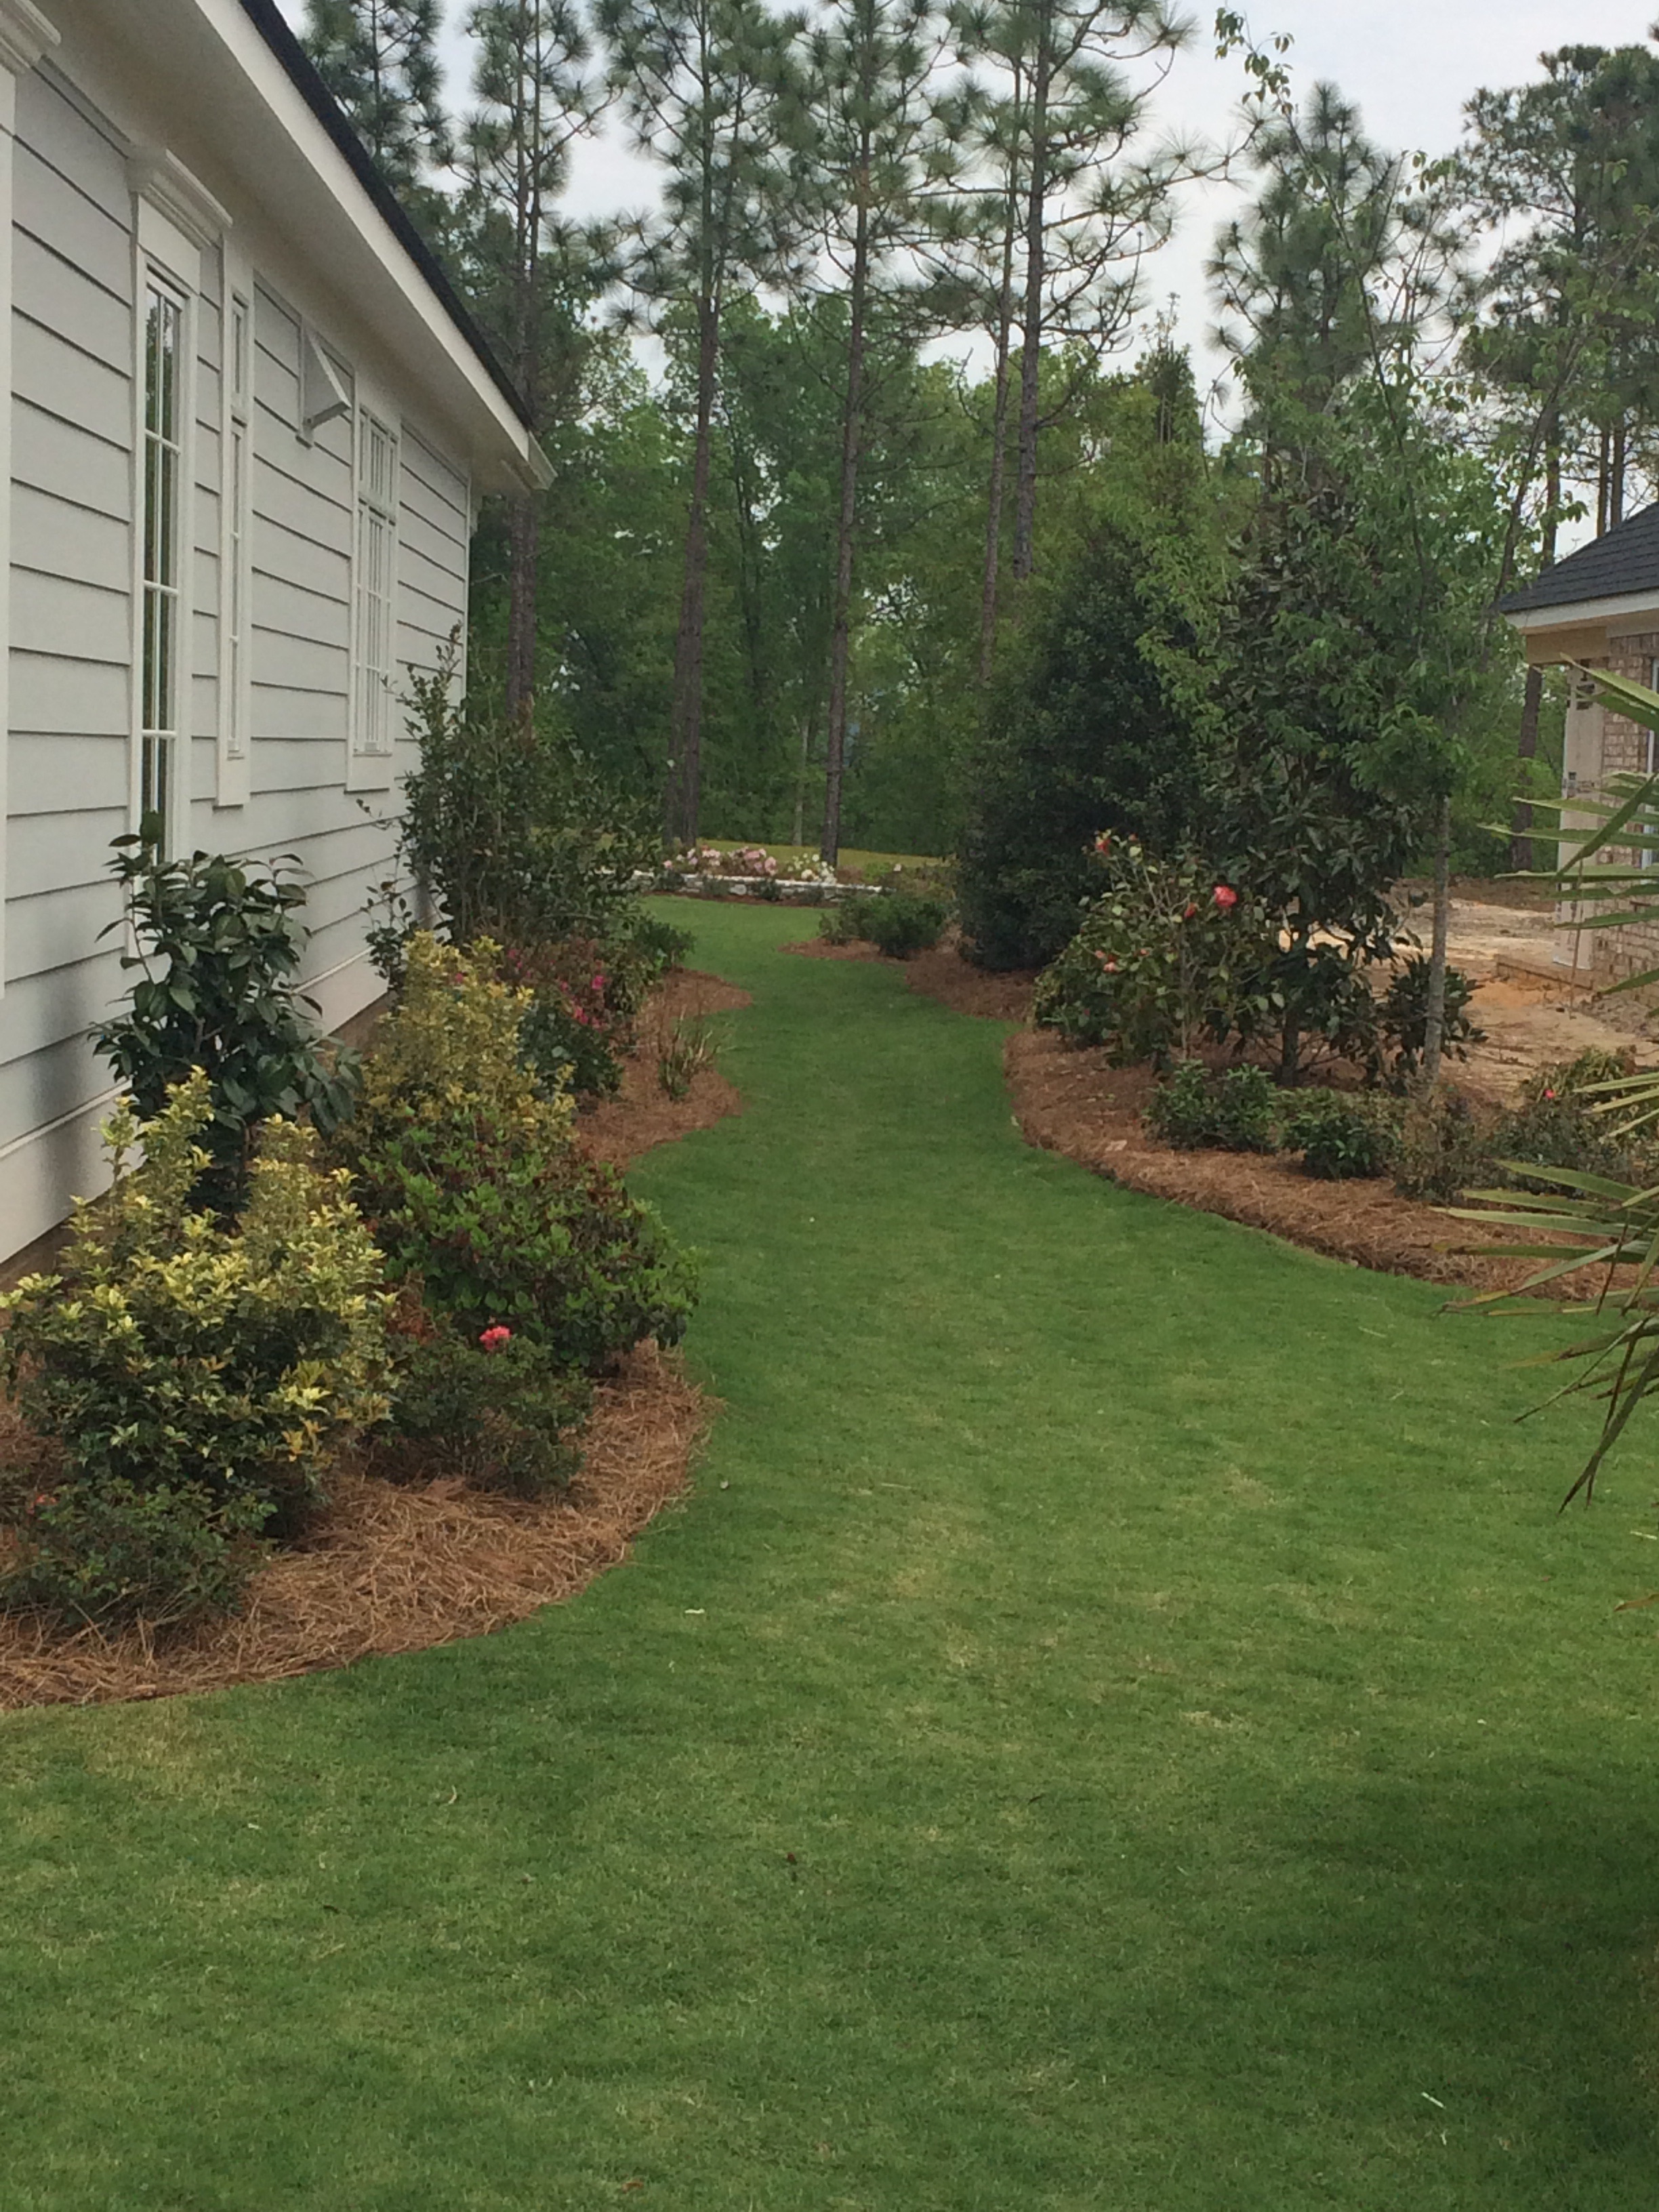 The Polo home's back lawn is full of TifTuf Bermuda and beautiful greenery.